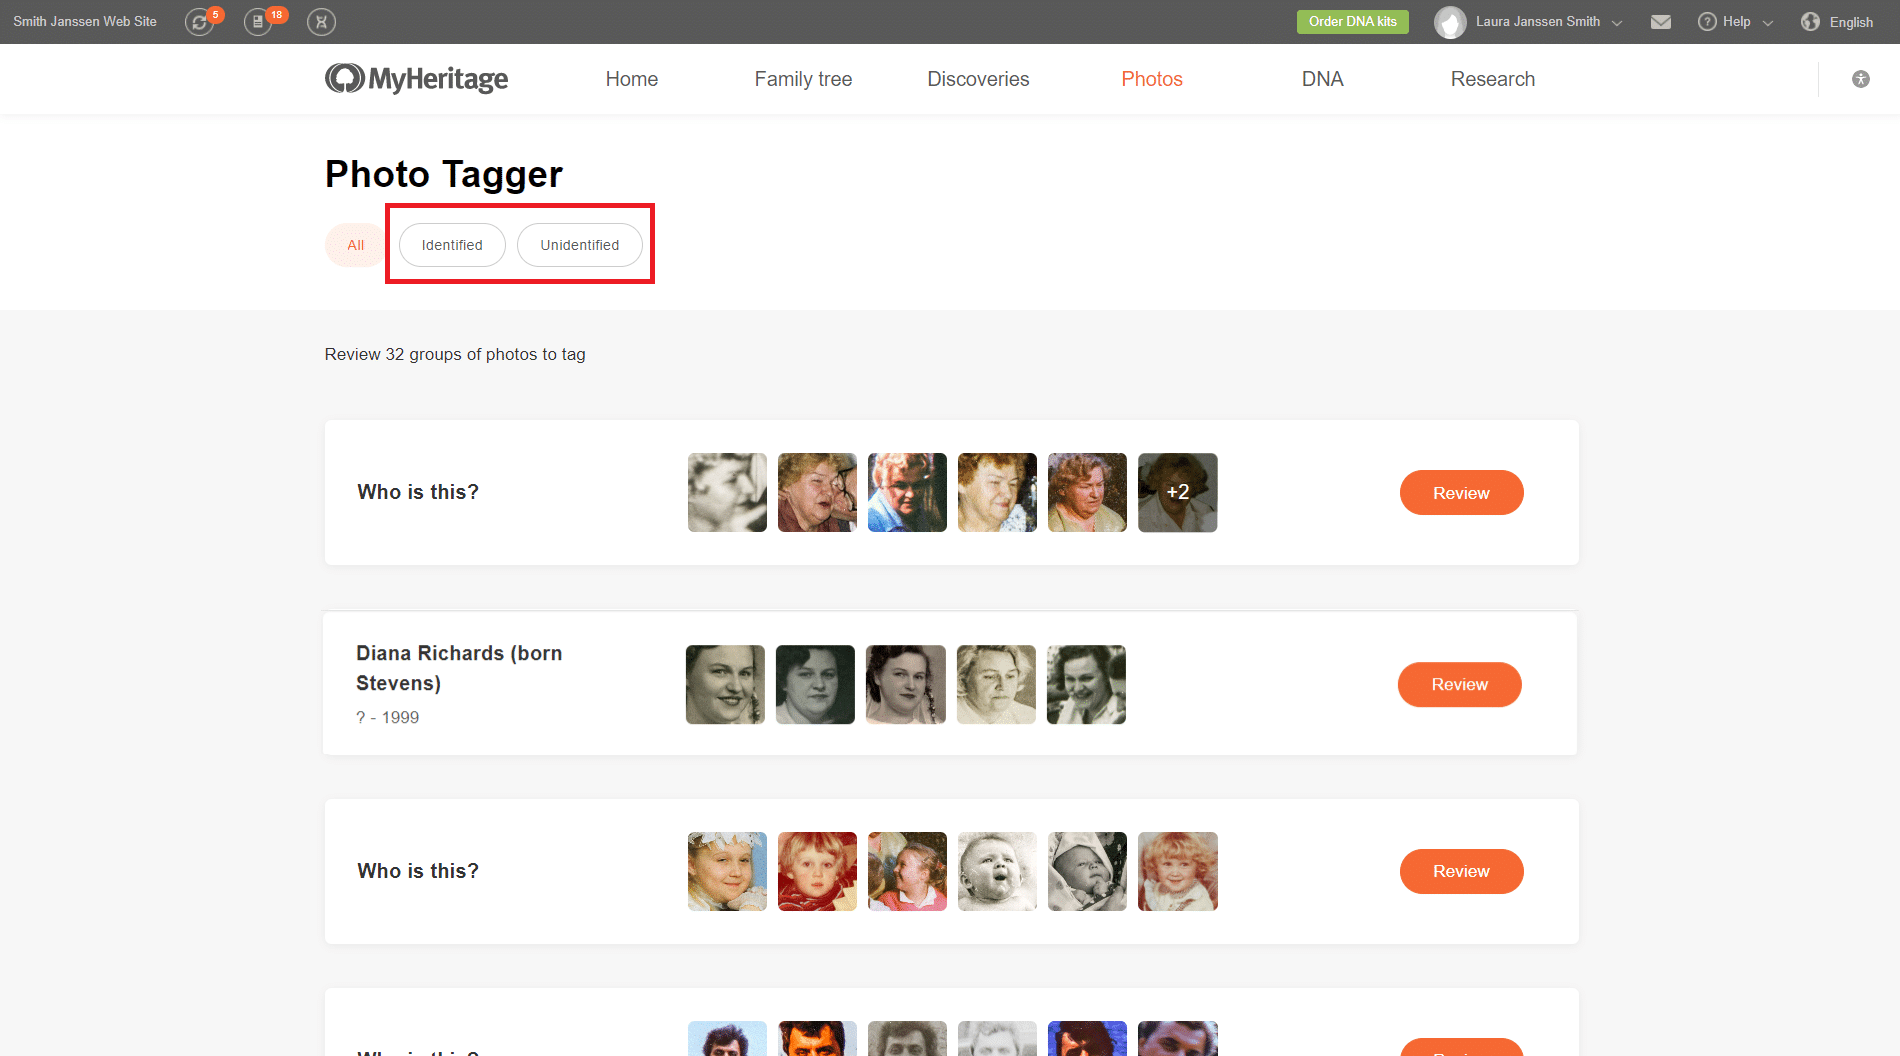 Photo tagger suggestions